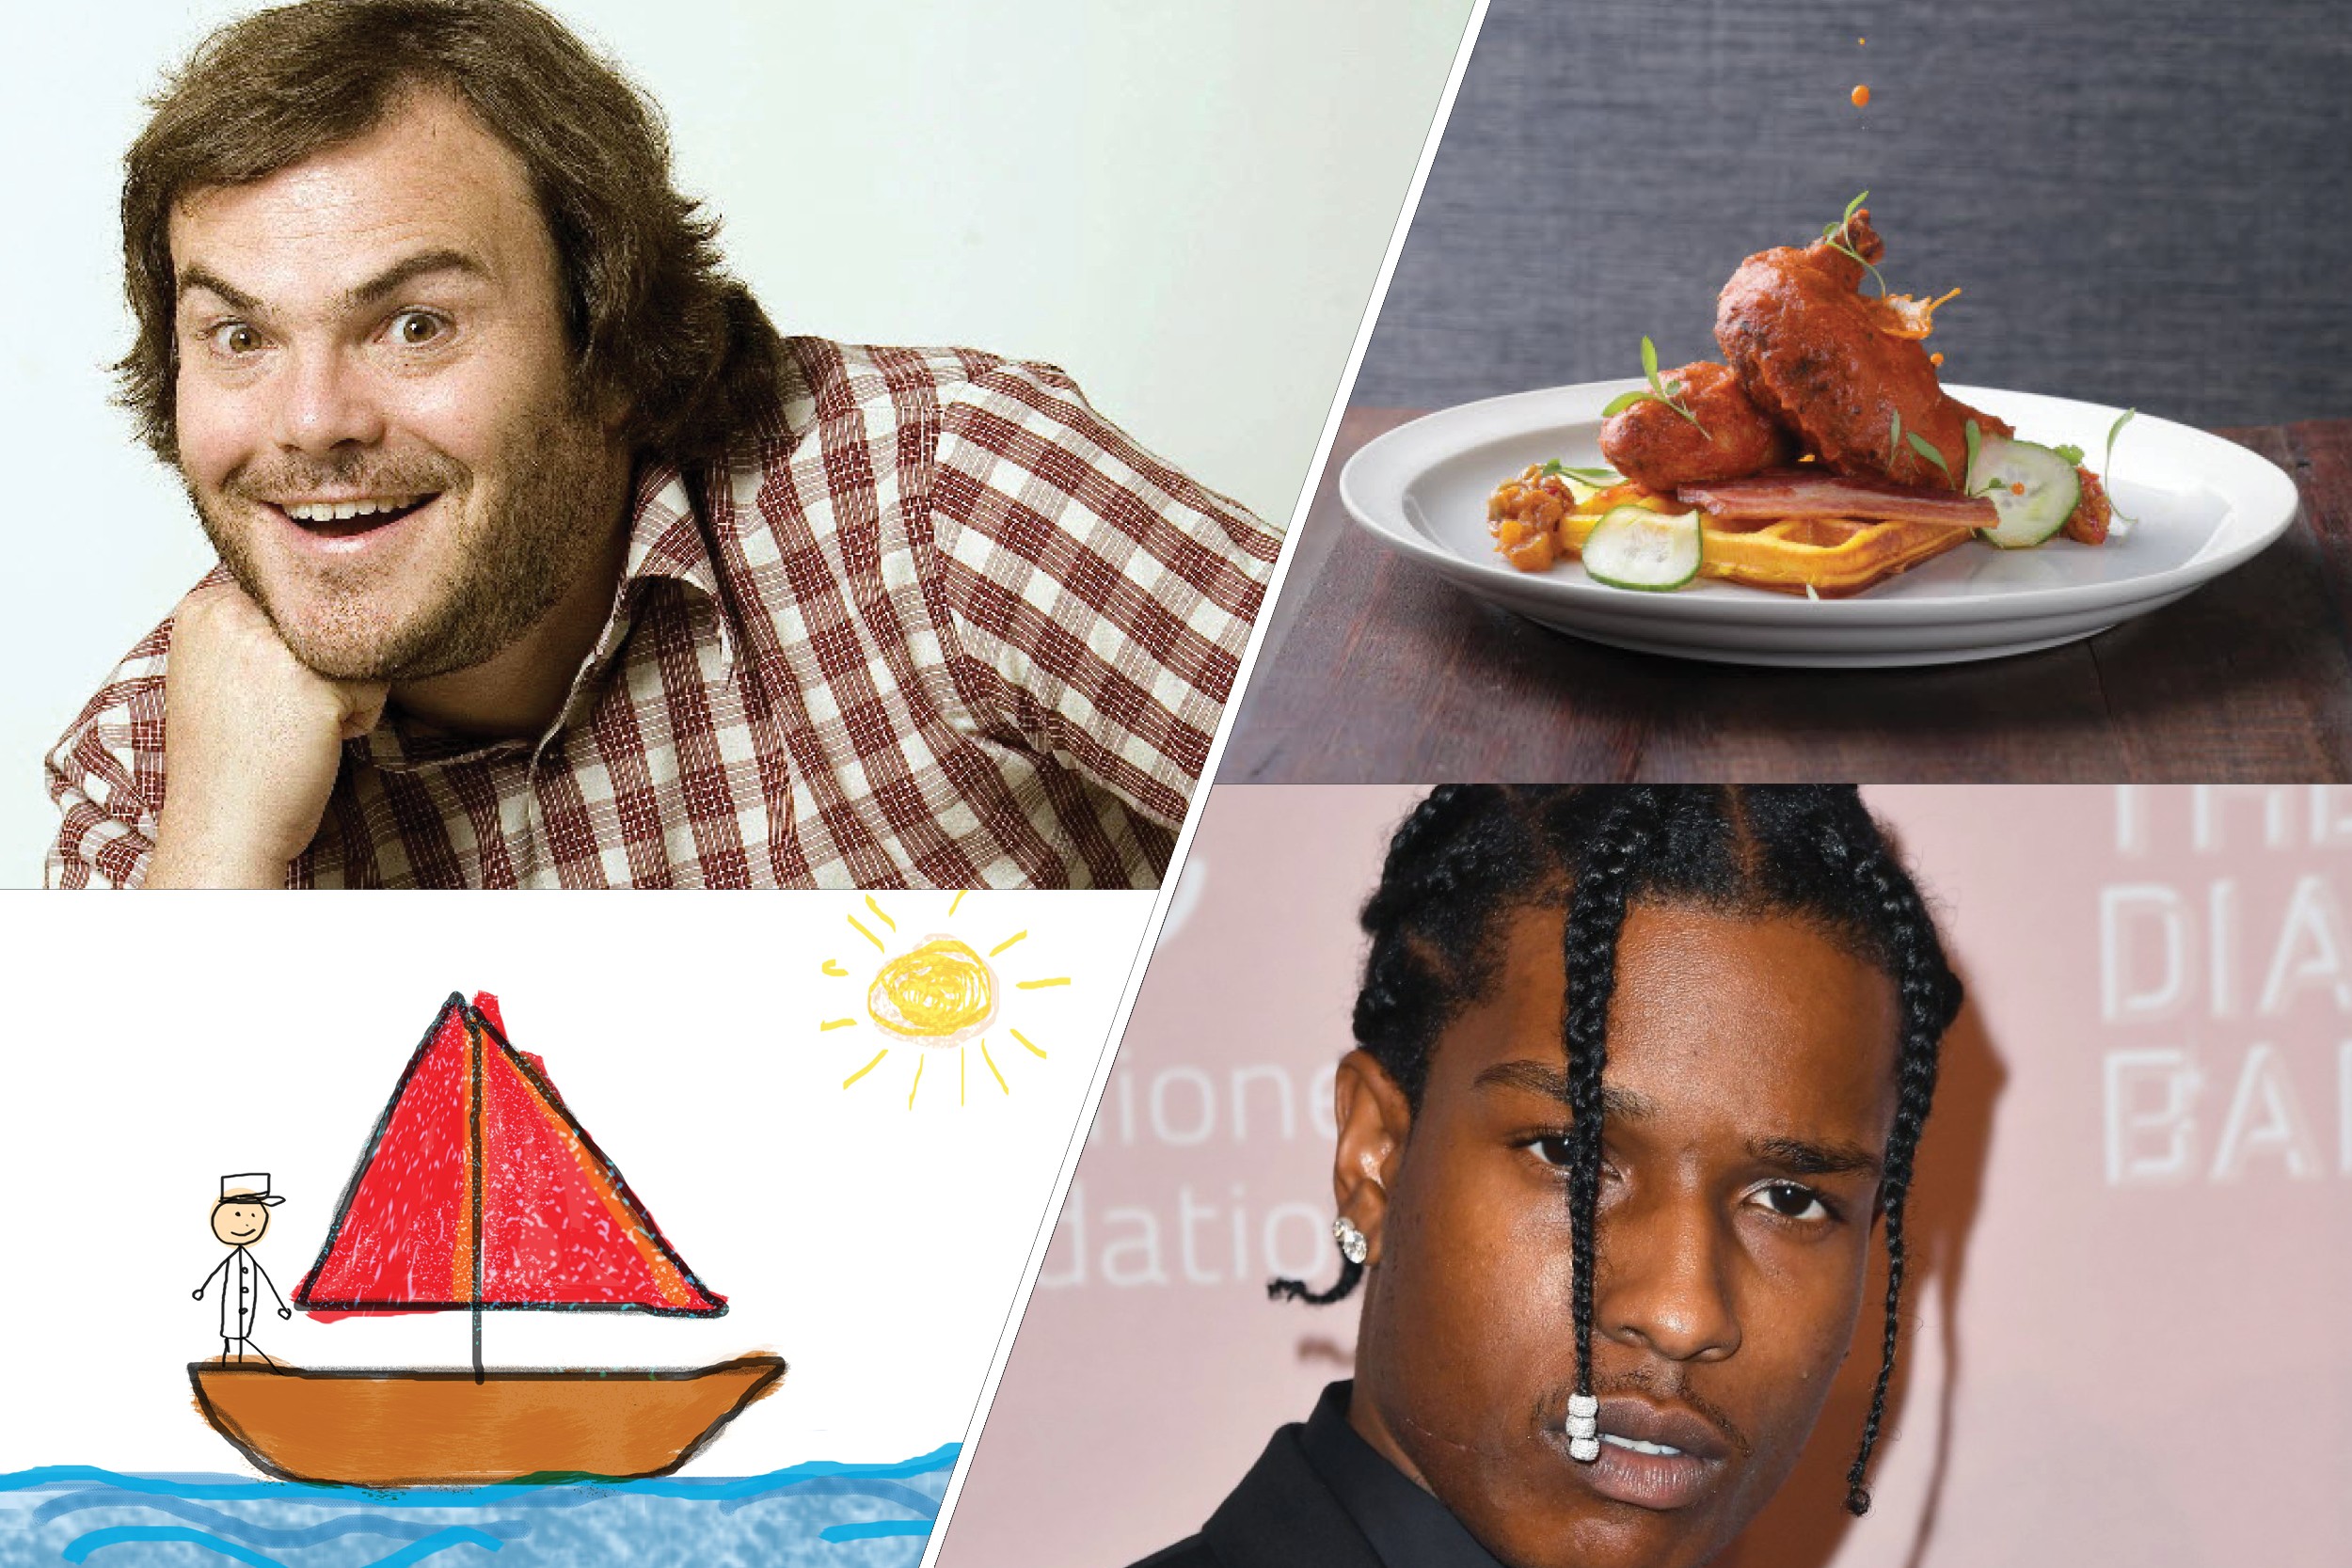 Before performing at Hong Kong’s Clockenflap music festival, Jack Black asked for a child’s drawing of a boat, while A$AP Rocky demanded chicken and waffles served onstage. Because he could.